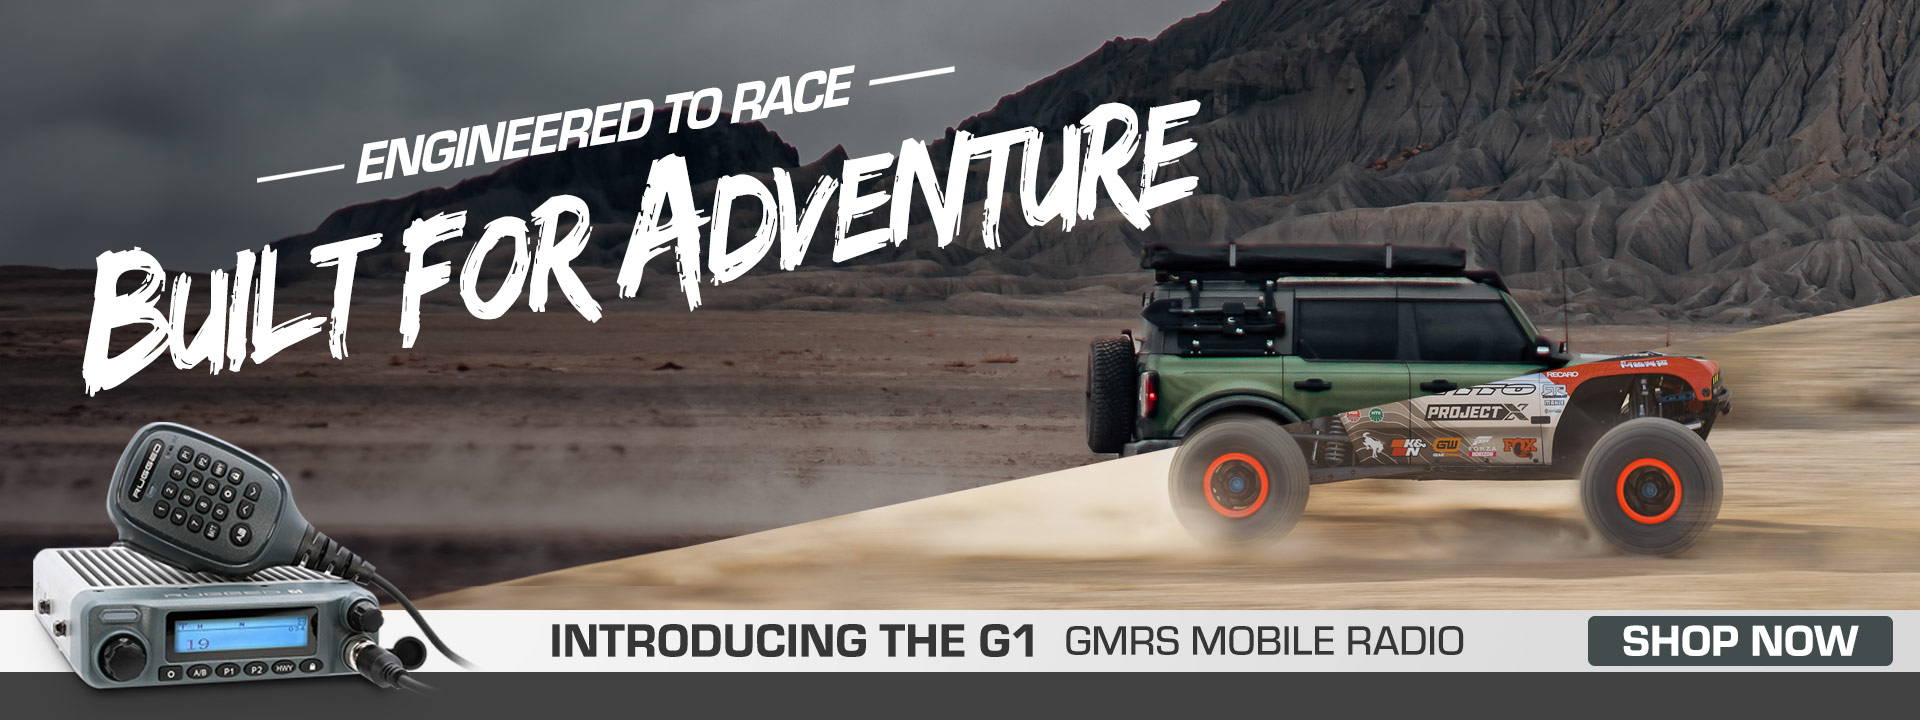 The Future of GMRS: Introducing the G1